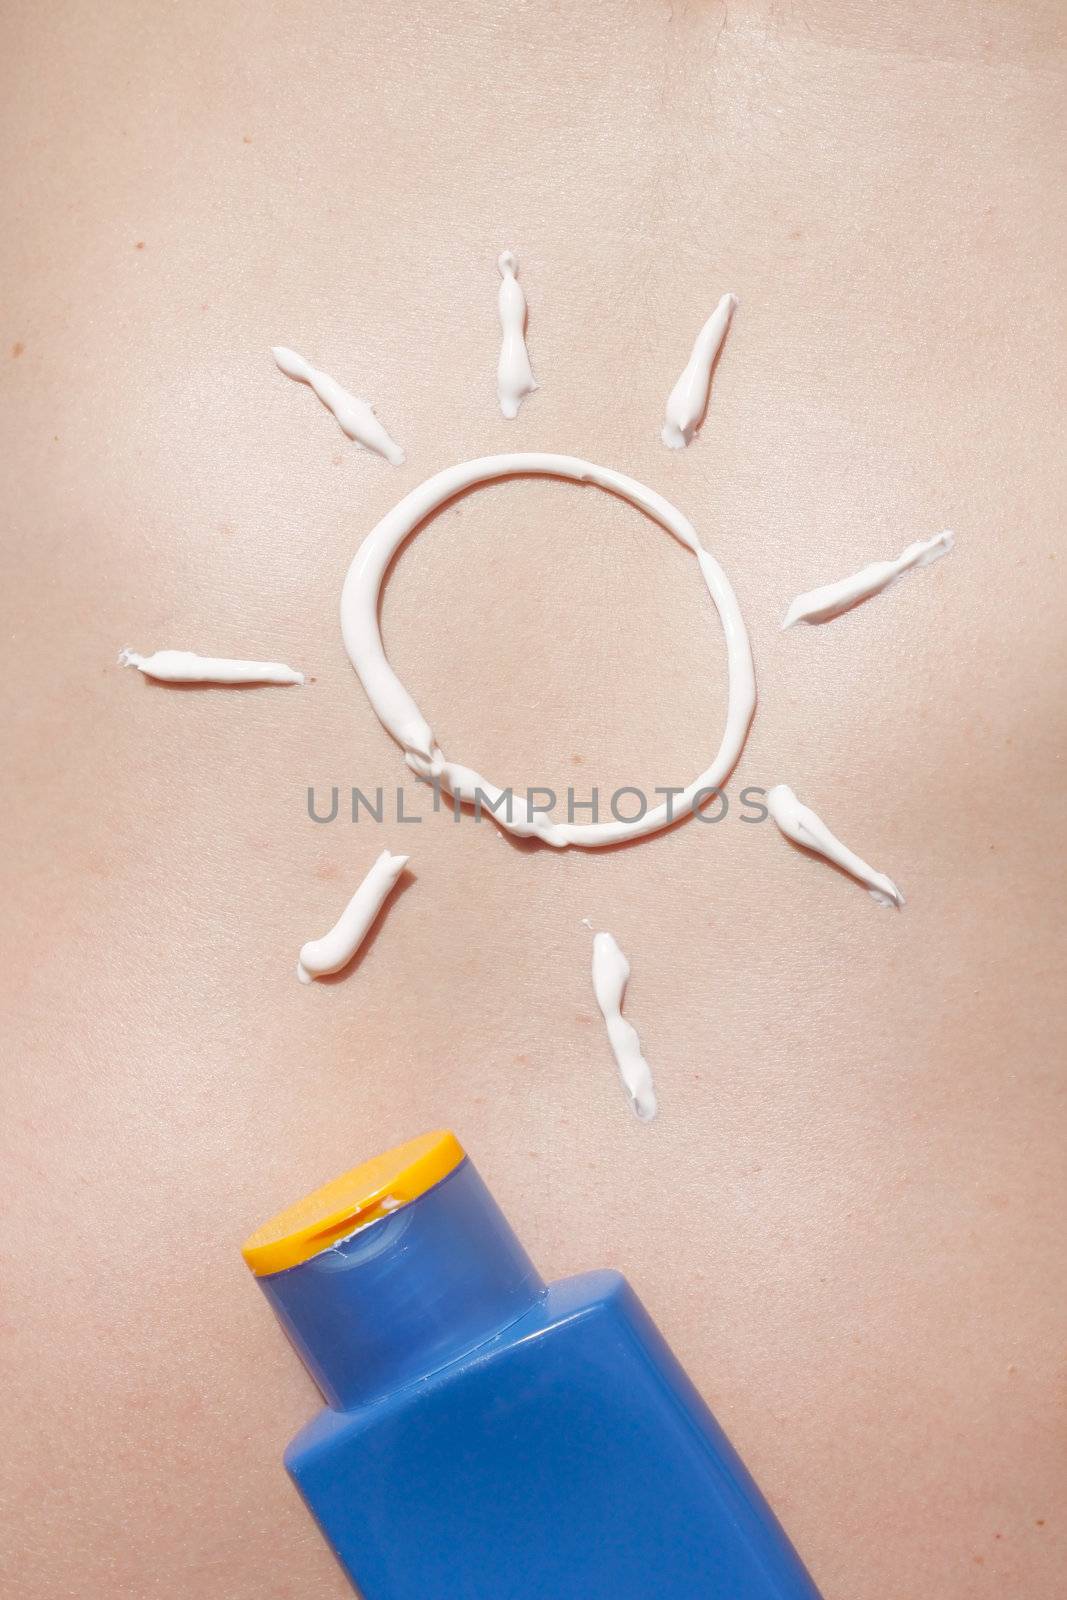 Sun and sunscreen by leeser